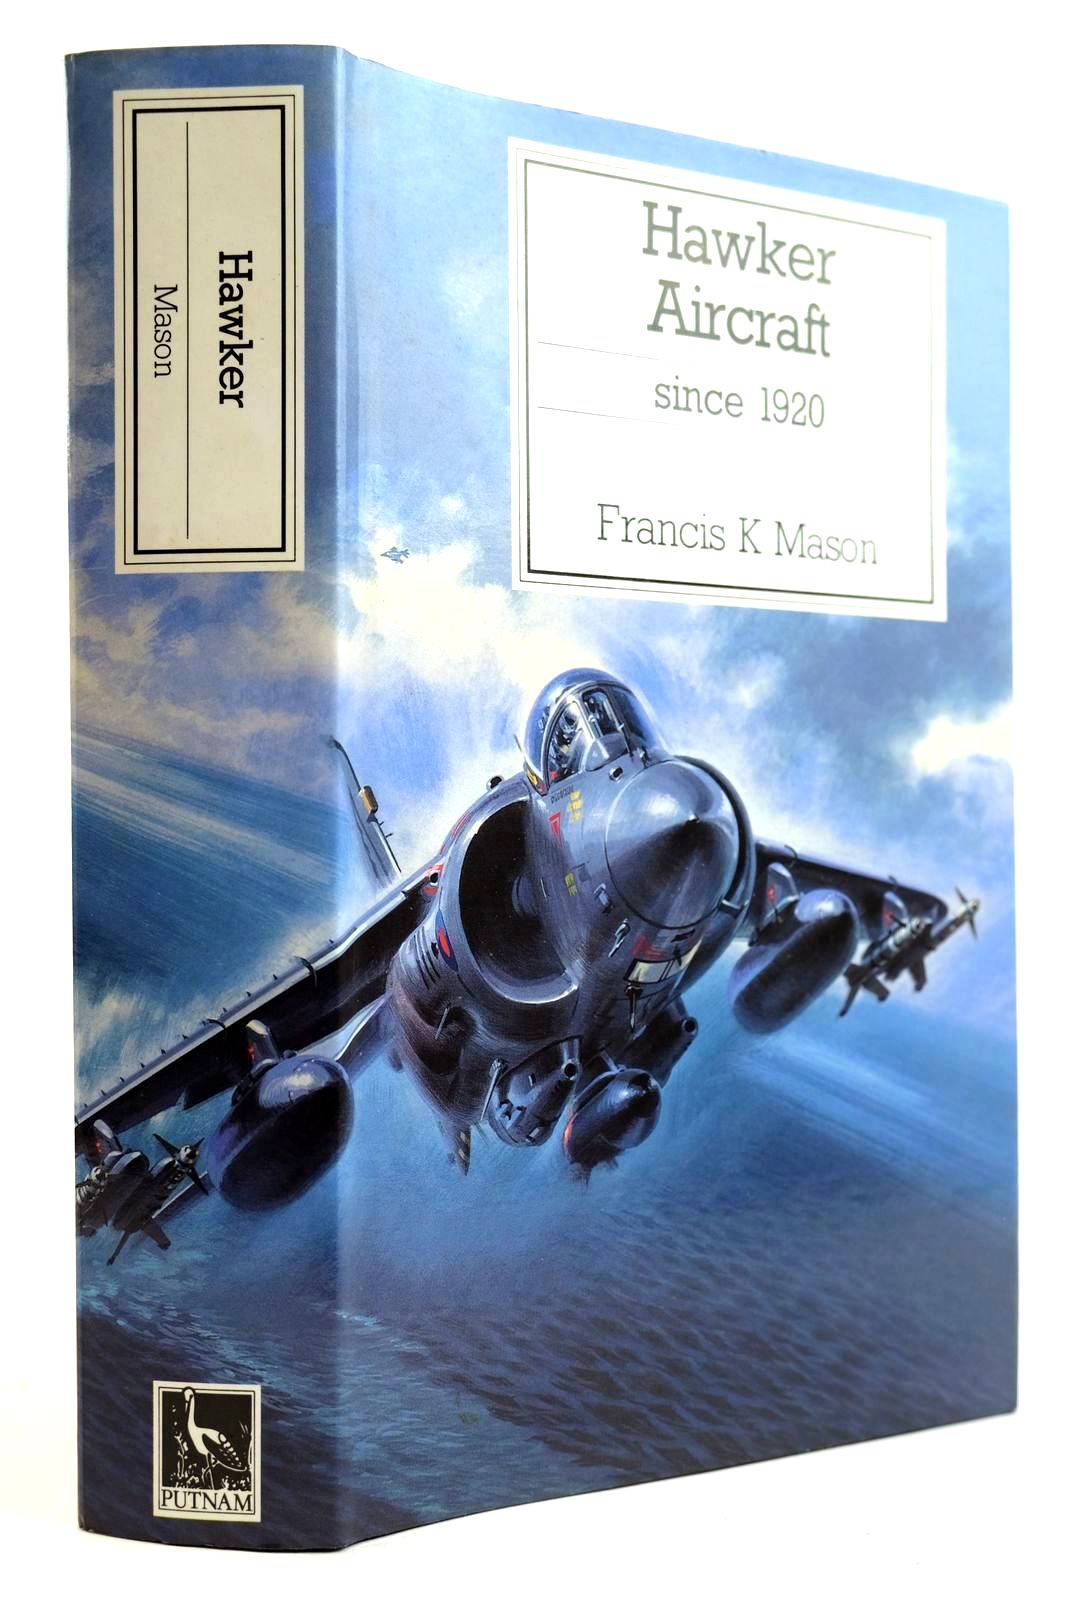 Photo of HAWKER AIRCRAFT SINCE 1920 written by Mason, Francis K. published by Putnam Aeronautical Books (STOCK CODE: 2132085)  for sale by Stella & Rose's Books